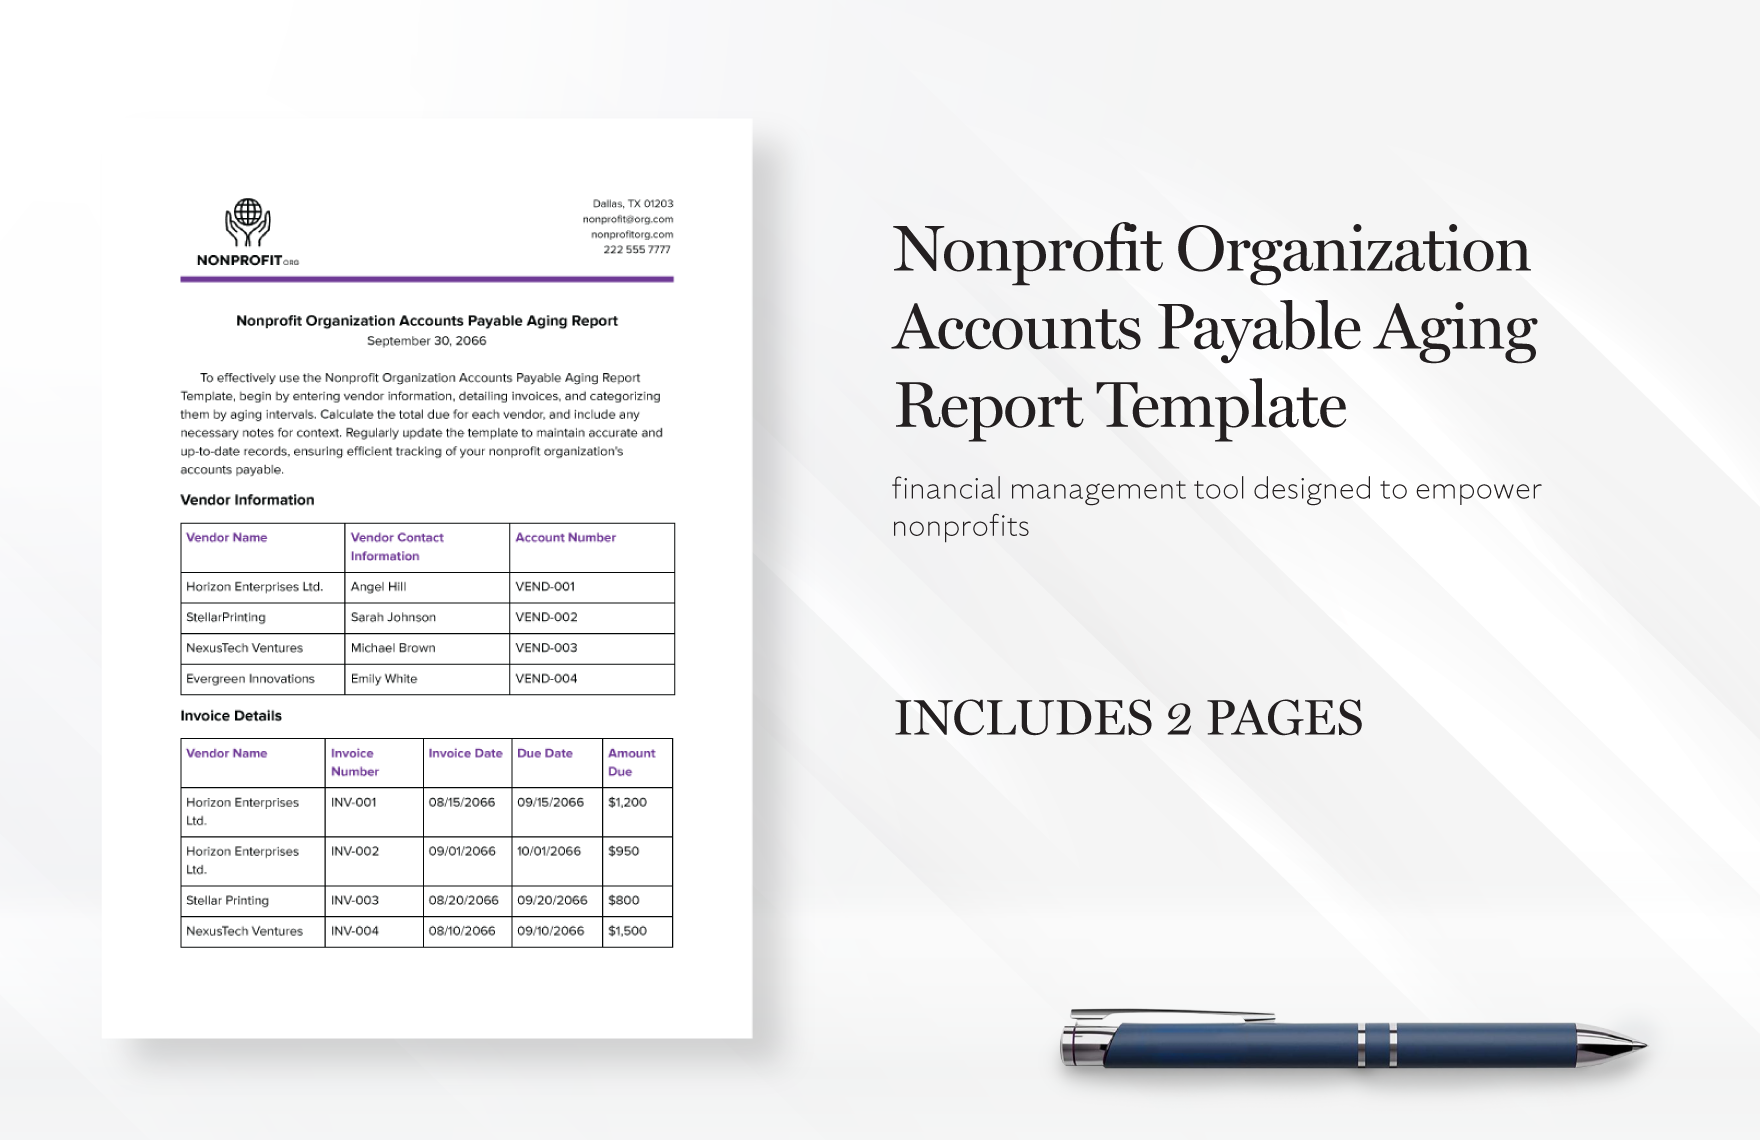 Nonprofit Organization Accounts Payable Aging Report Template in Word, Google Docs, PDF